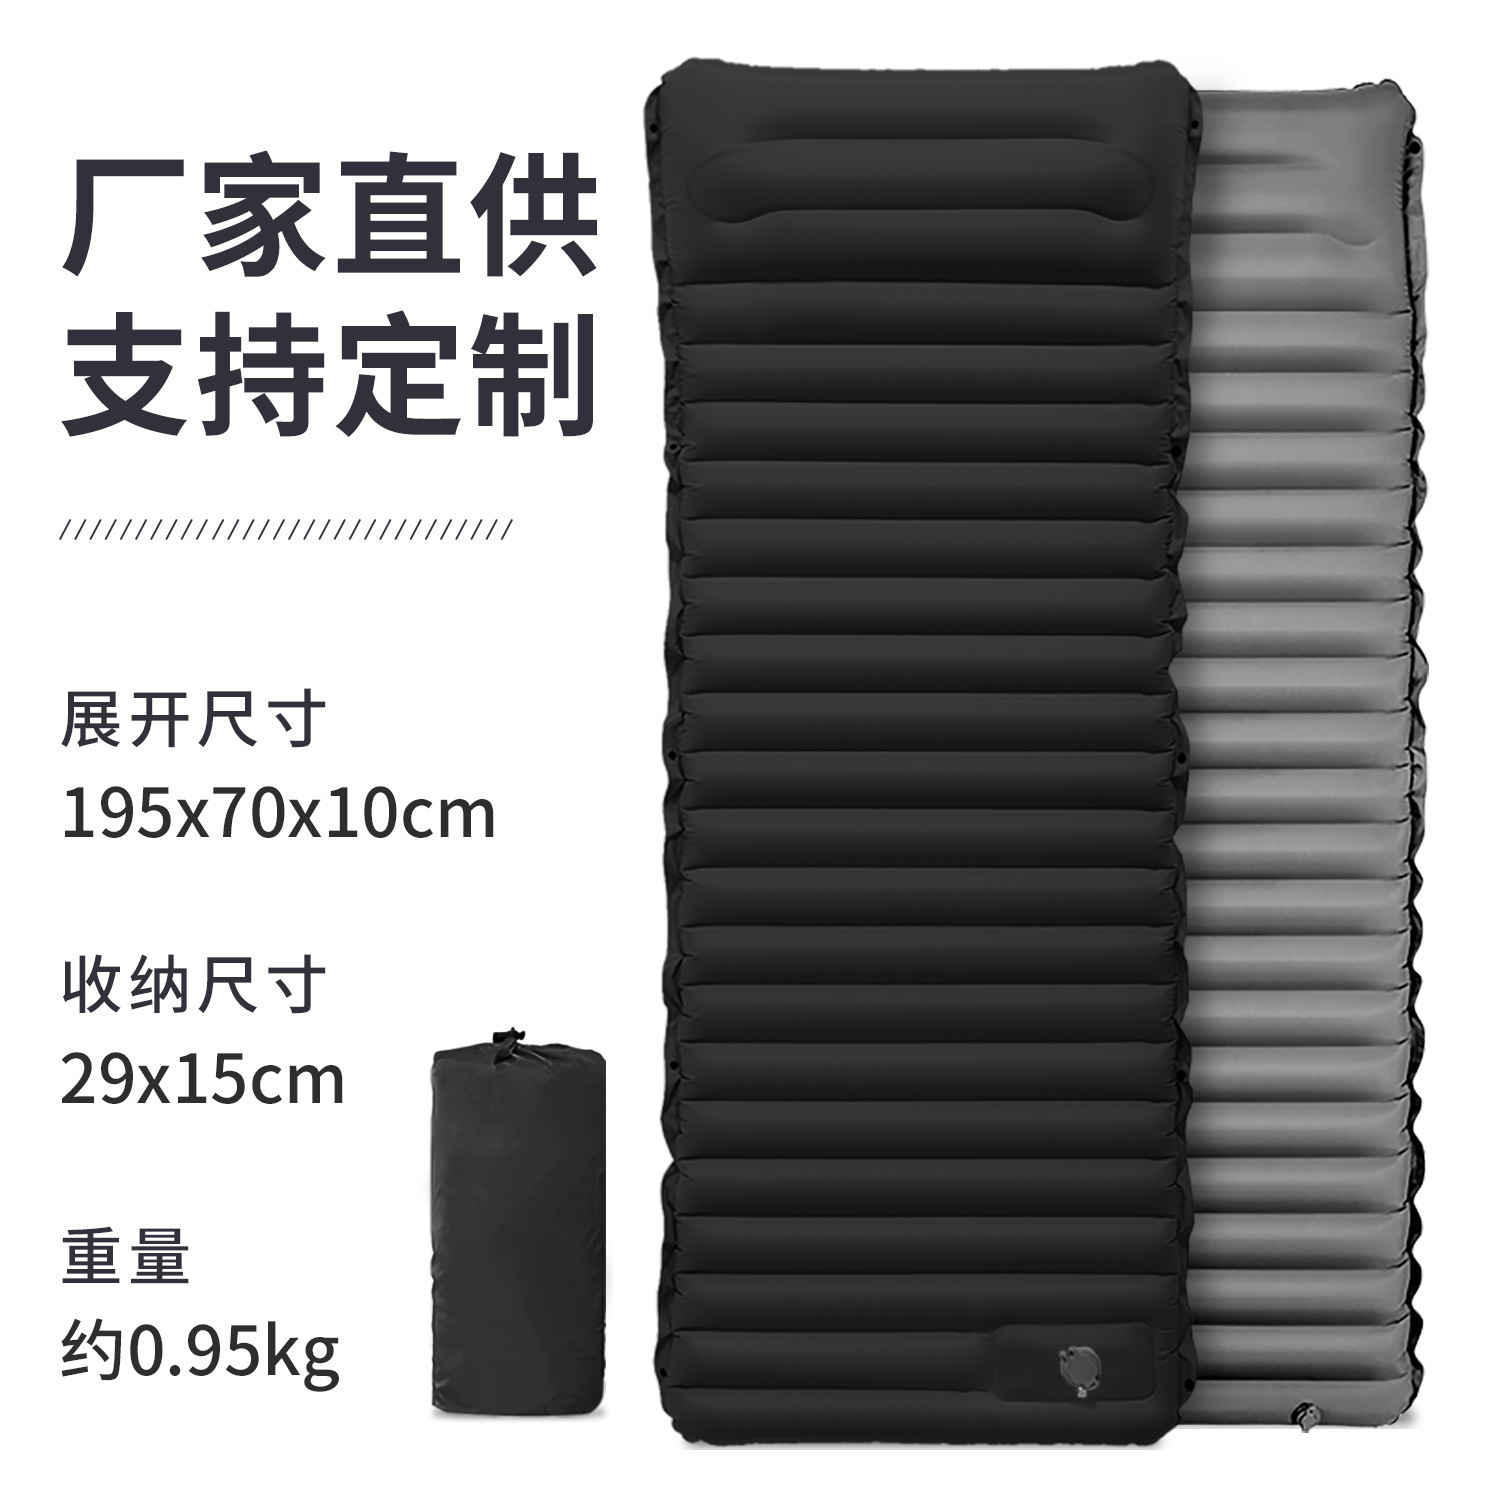 Outdoor Camping Tent Pedal Type Tpu Inflatable Mattress Automatic Portable Beach Folding Picnic Mat New Style